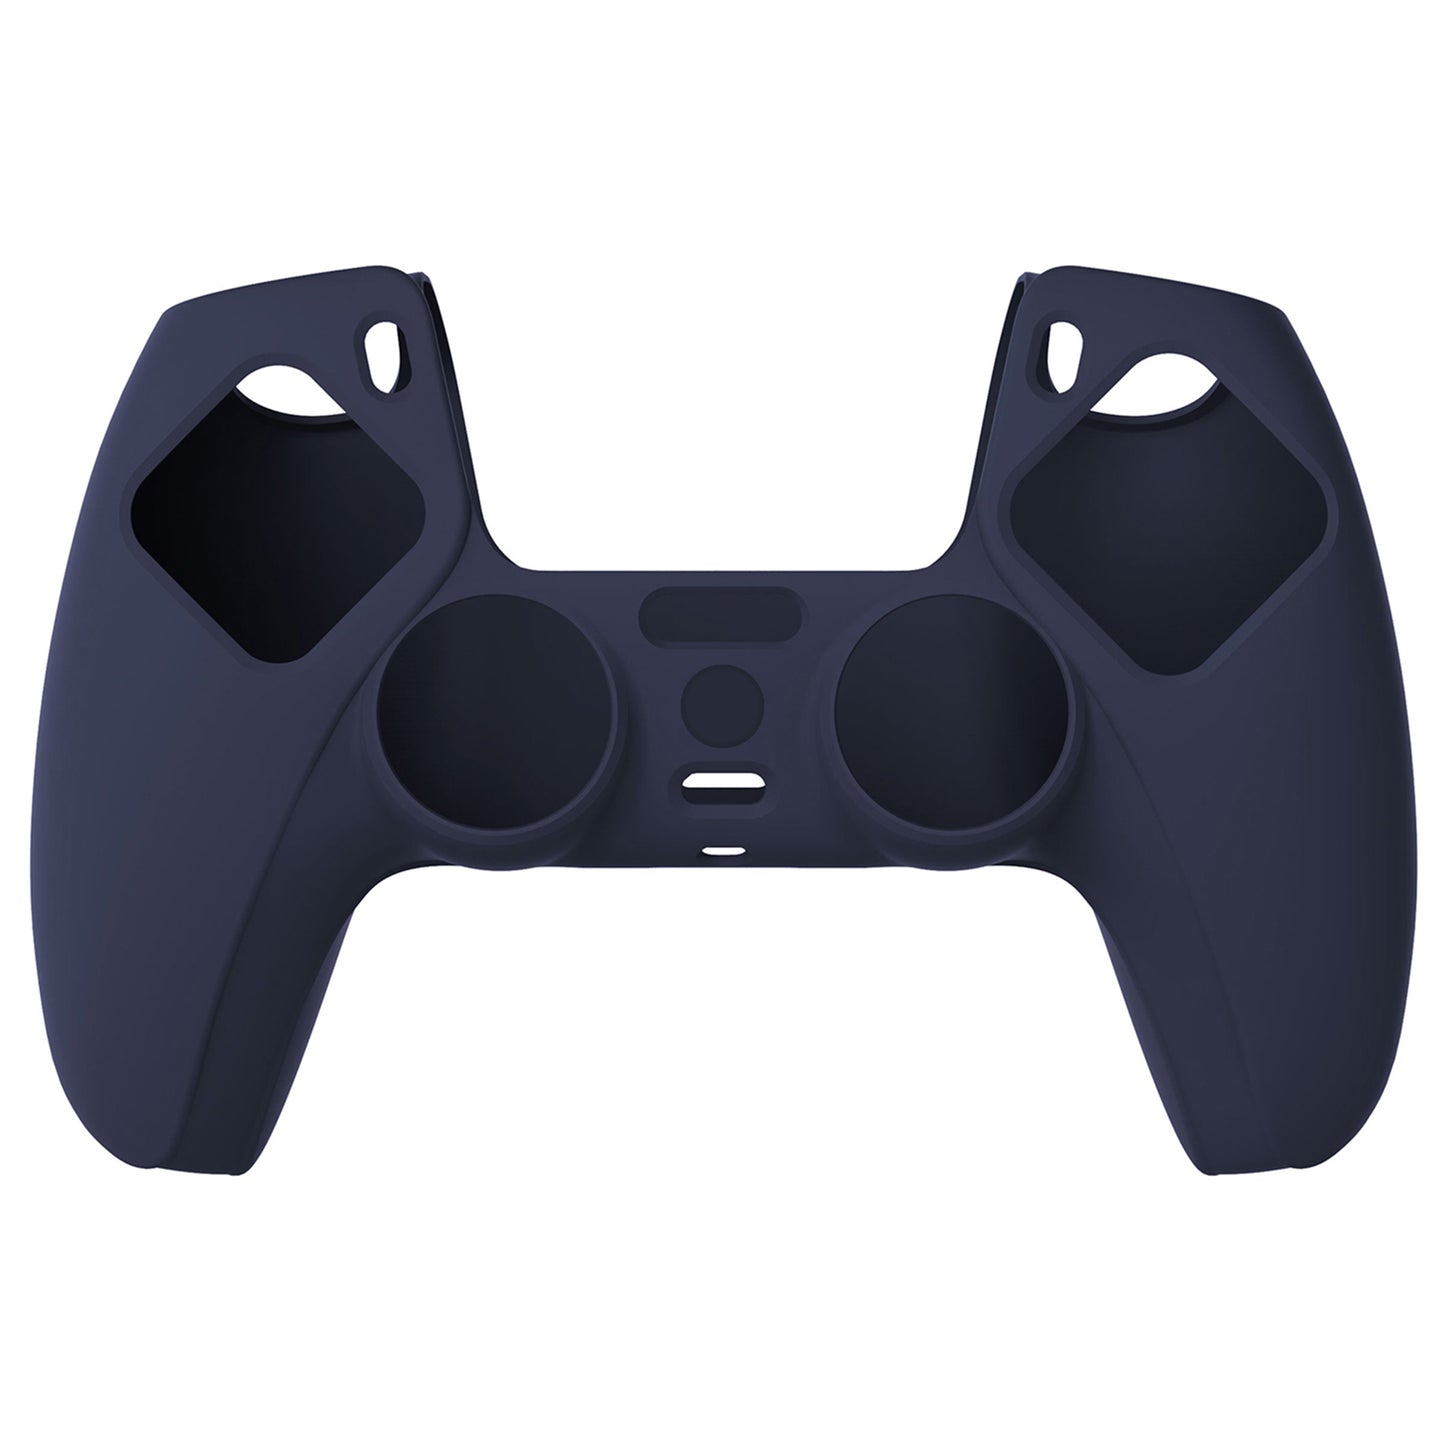 PlayVital Pure Series Anti-Slip Silicone Cover Skin with Thumb Grip Caps for PS5 Wireless Controller - Midnight Blue - KOPF003 PlayVital